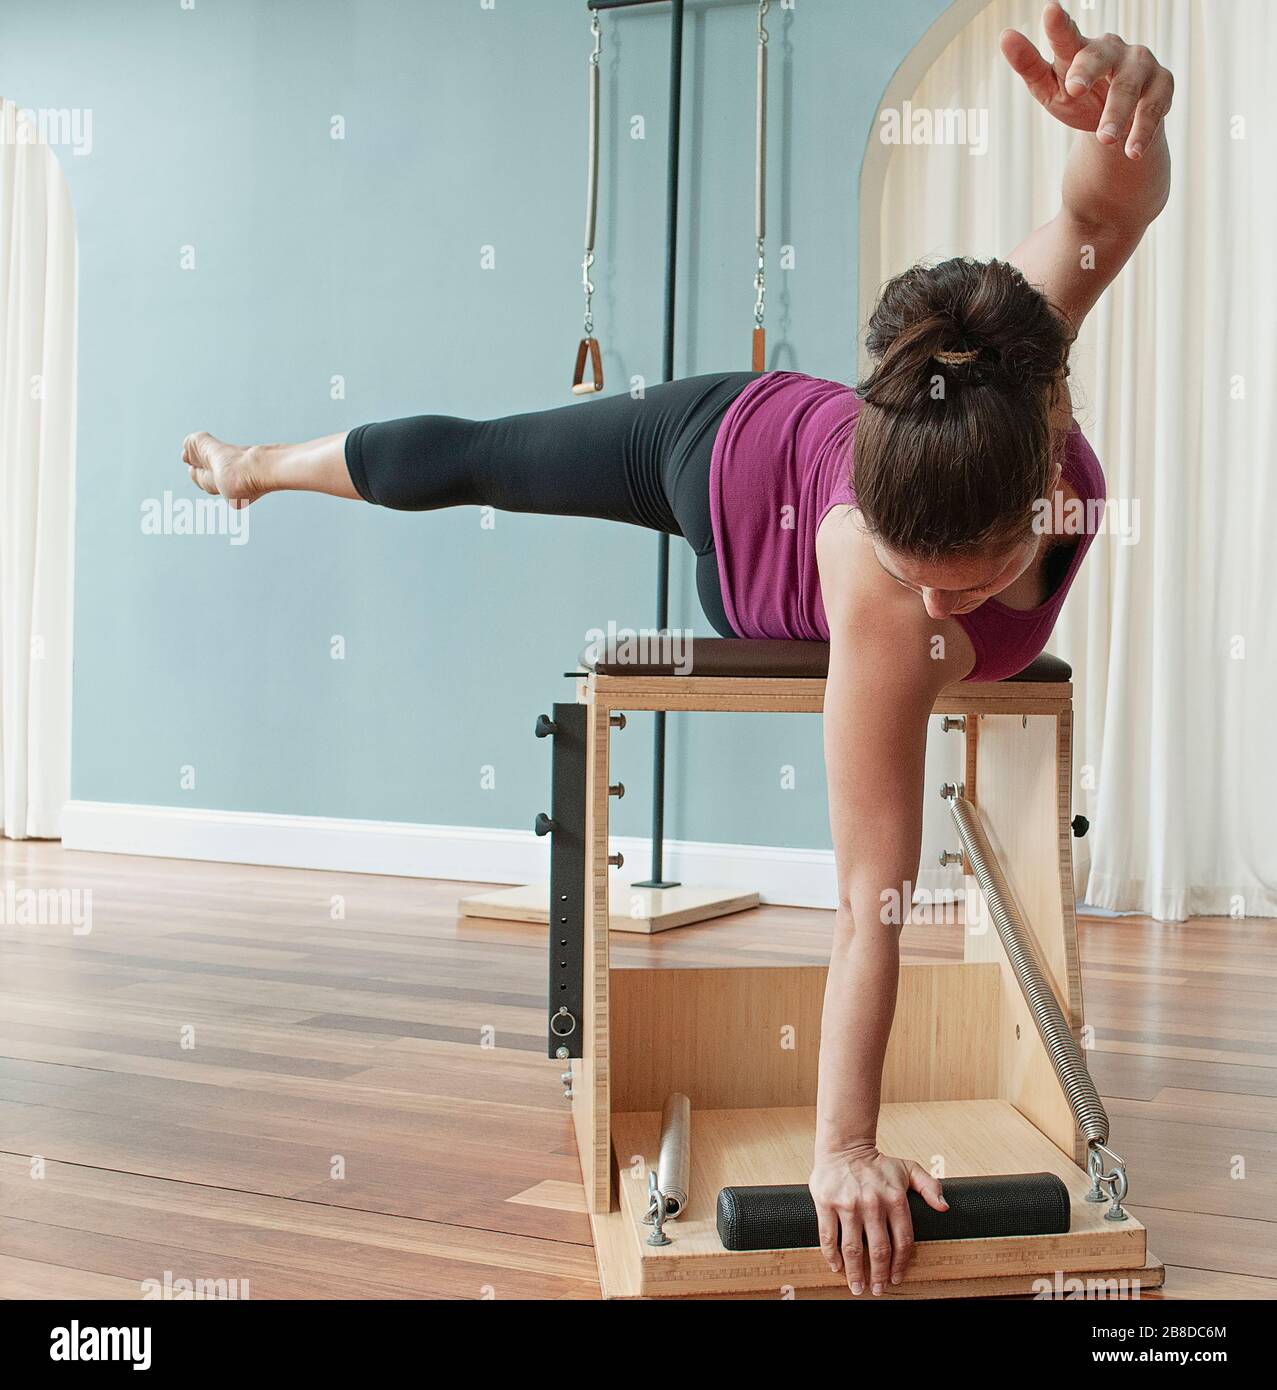 A woman doing a Pilates side body twist on a chair apparatus. Stock Photo